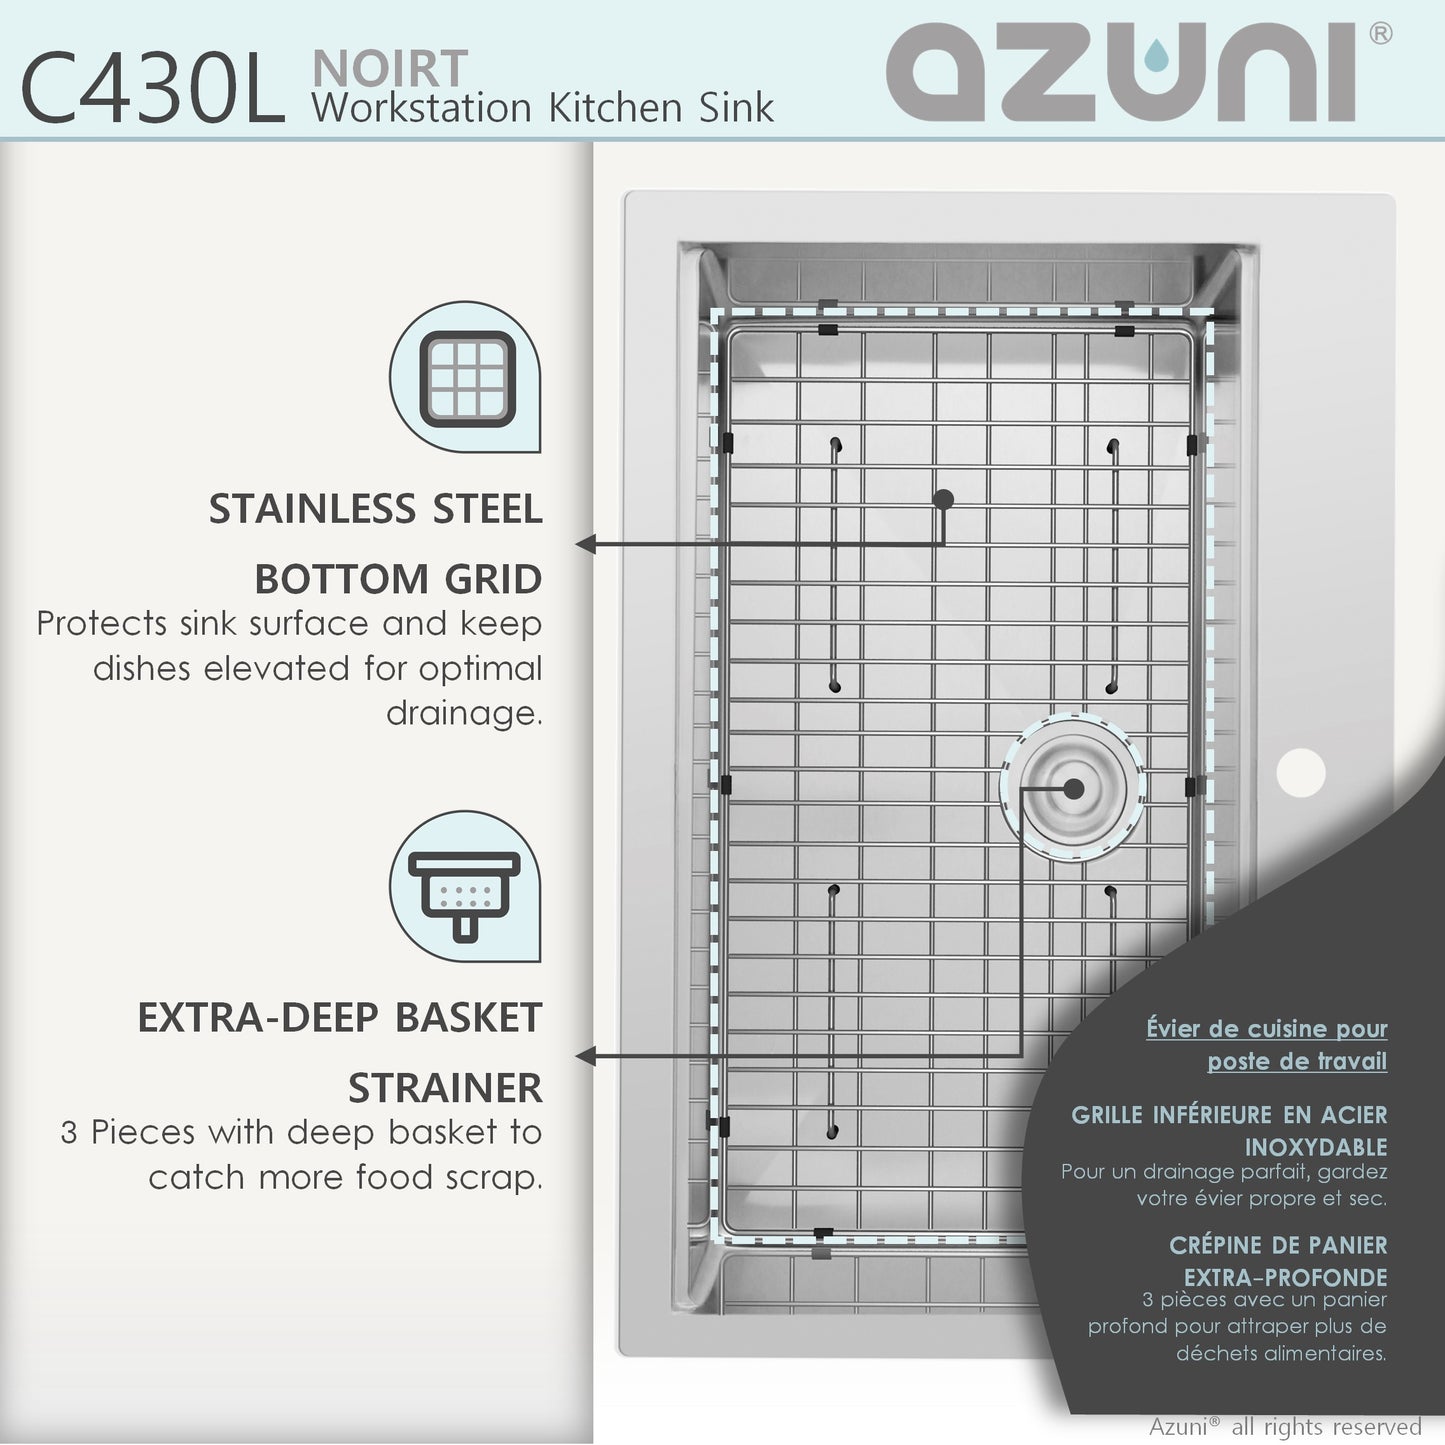 AZUNI 30"L x 20.5"W Noirt Top mounted Single Bowl Stainless Steel Ledge Workstation Kitchen Sink accessories included